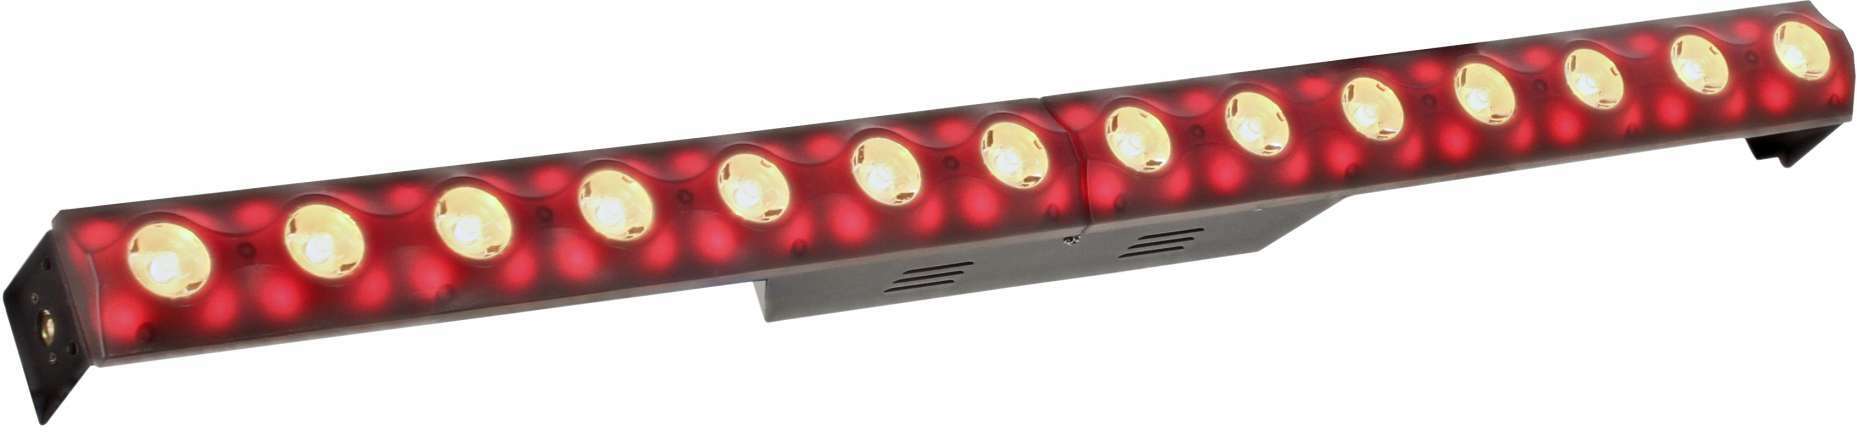 Power Lighting Barre Led 14x3w Crystal - LED staaf - Main picture